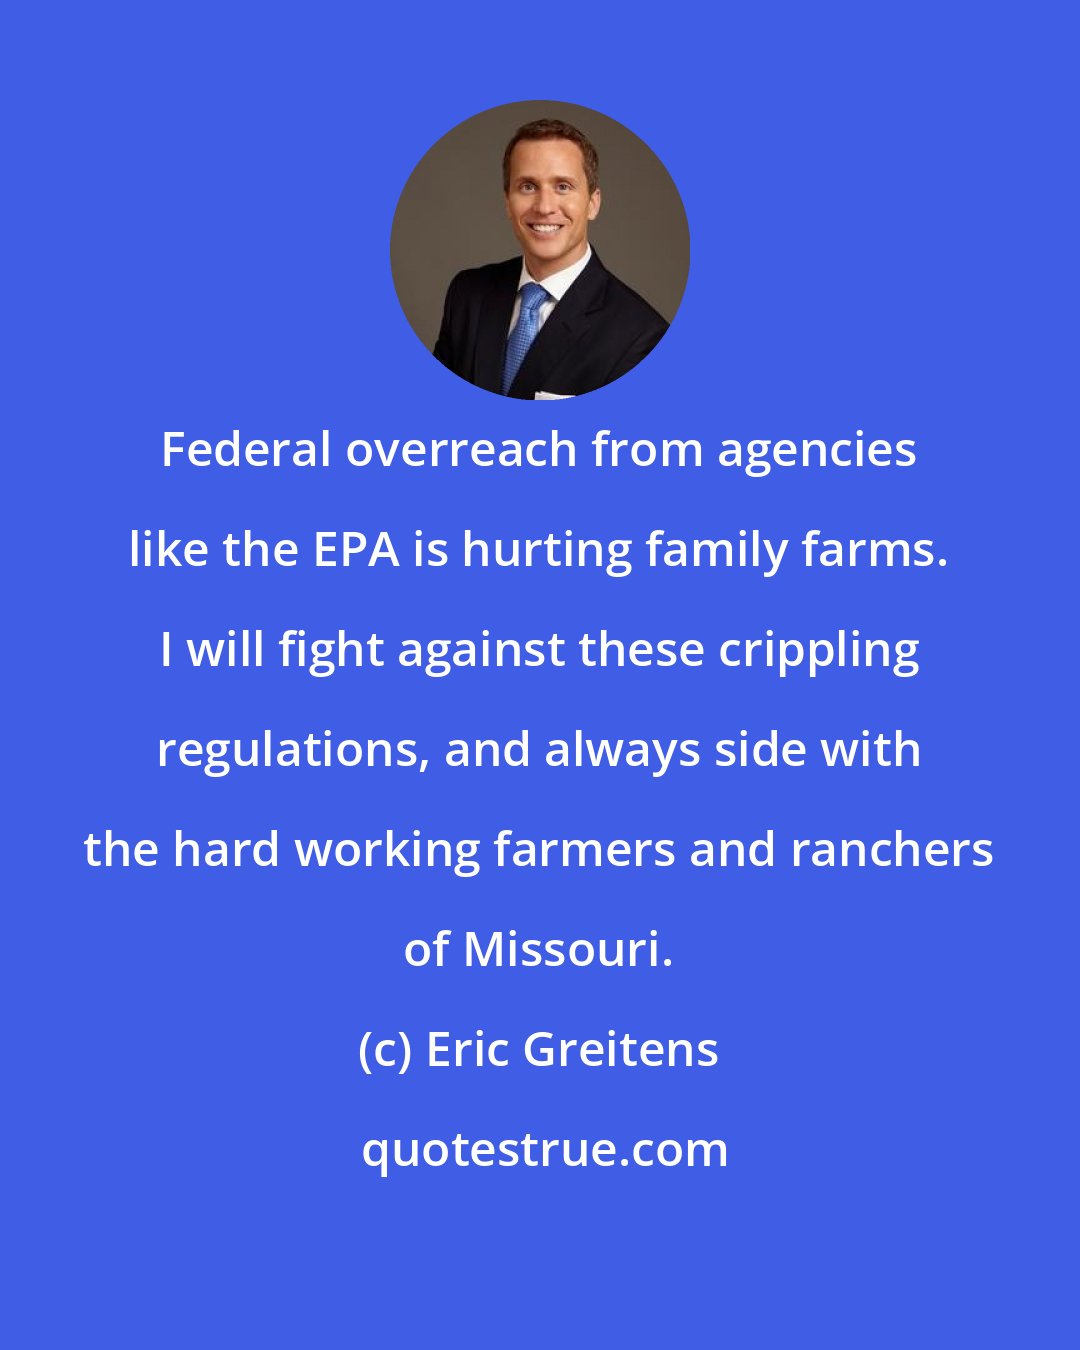 Eric Greitens: Federal overreach from agencies like the EPA is hurting family farms. I will fight against these crippling regulations, and always side with the hard working farmers and ranchers of Missouri.